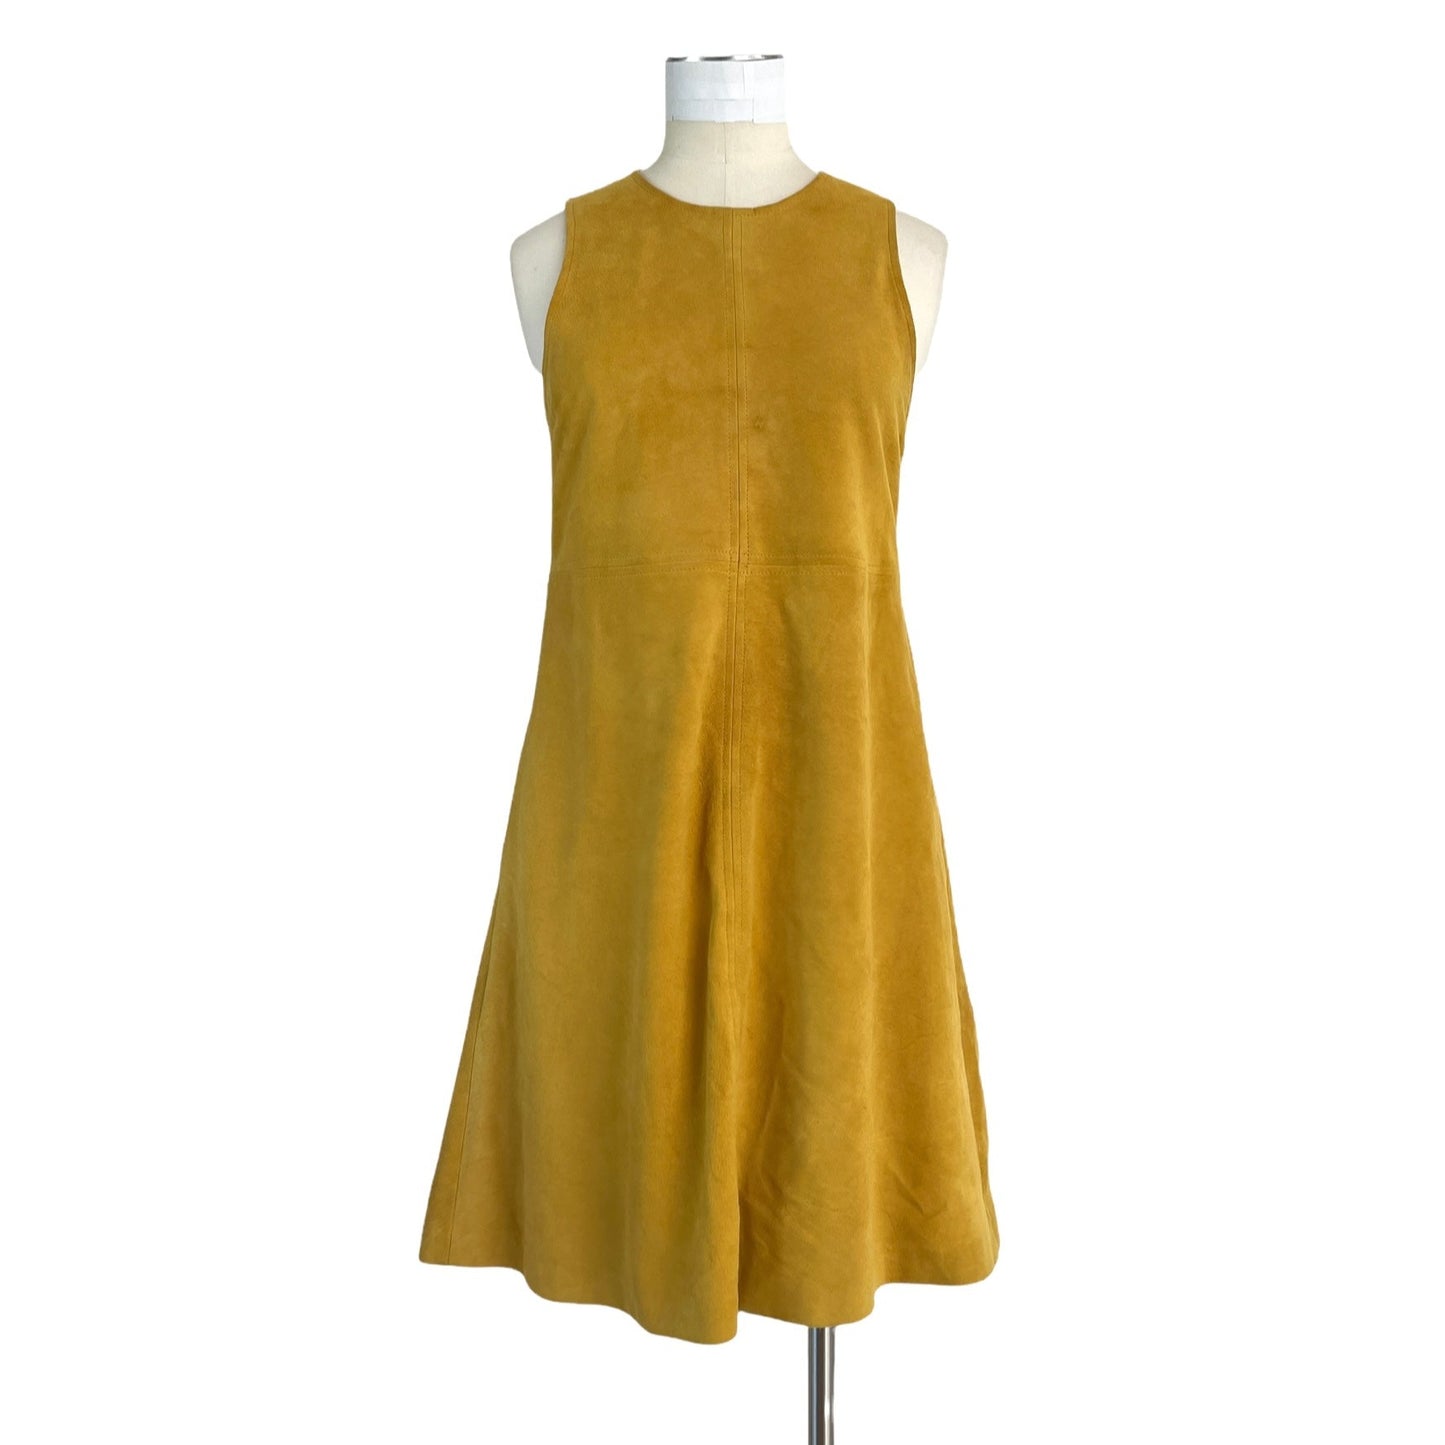 Suede Yellow Dress - 2